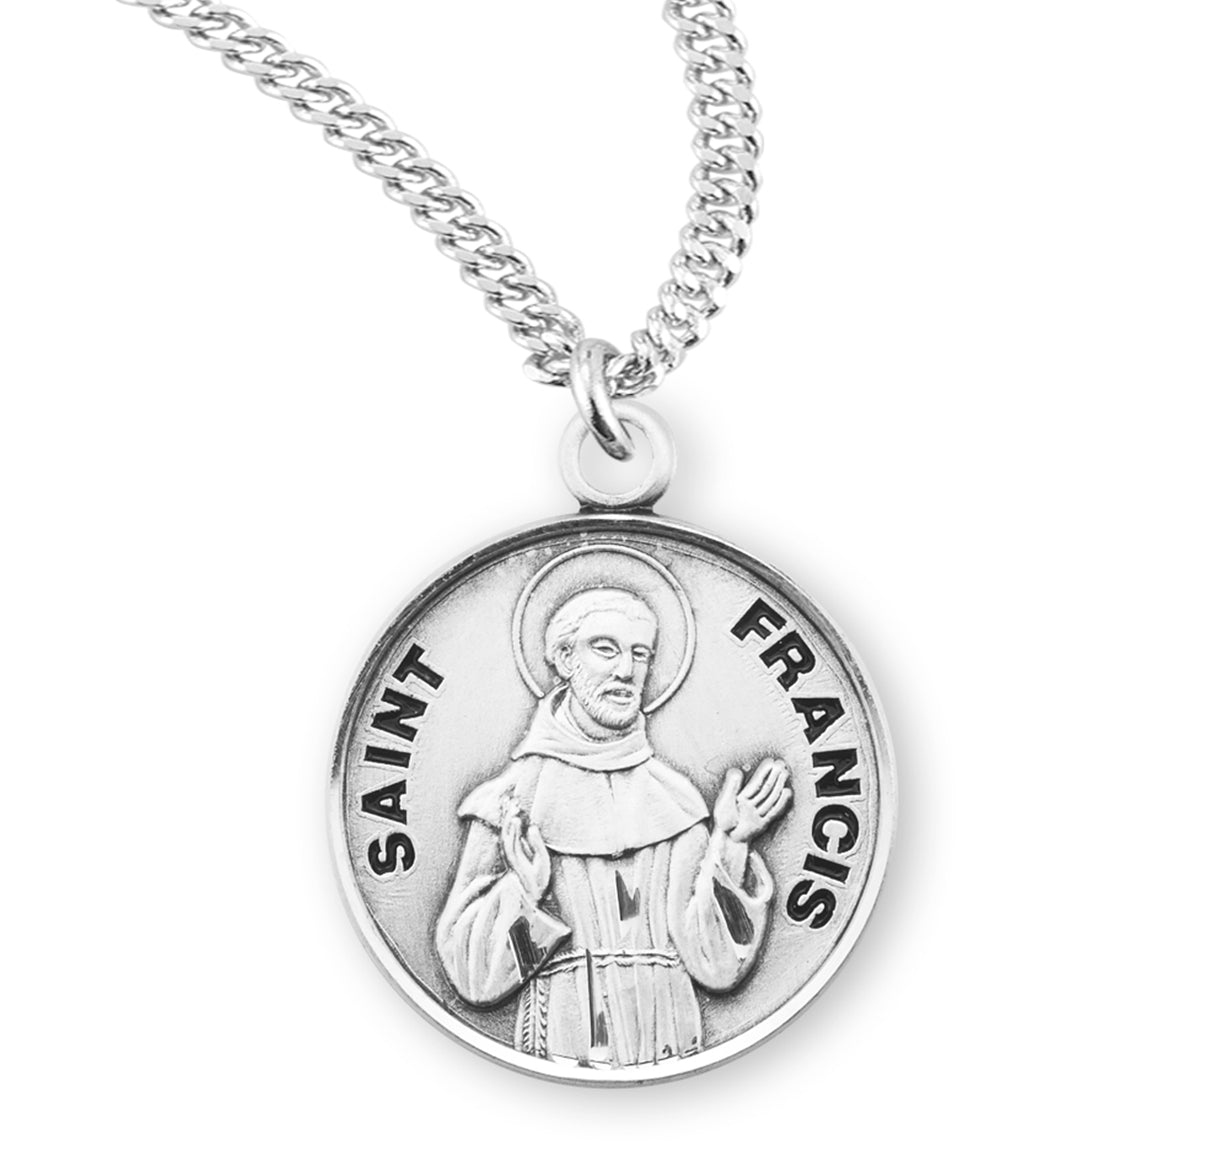 Patron Saint Francis Round Sterling Silver Medal